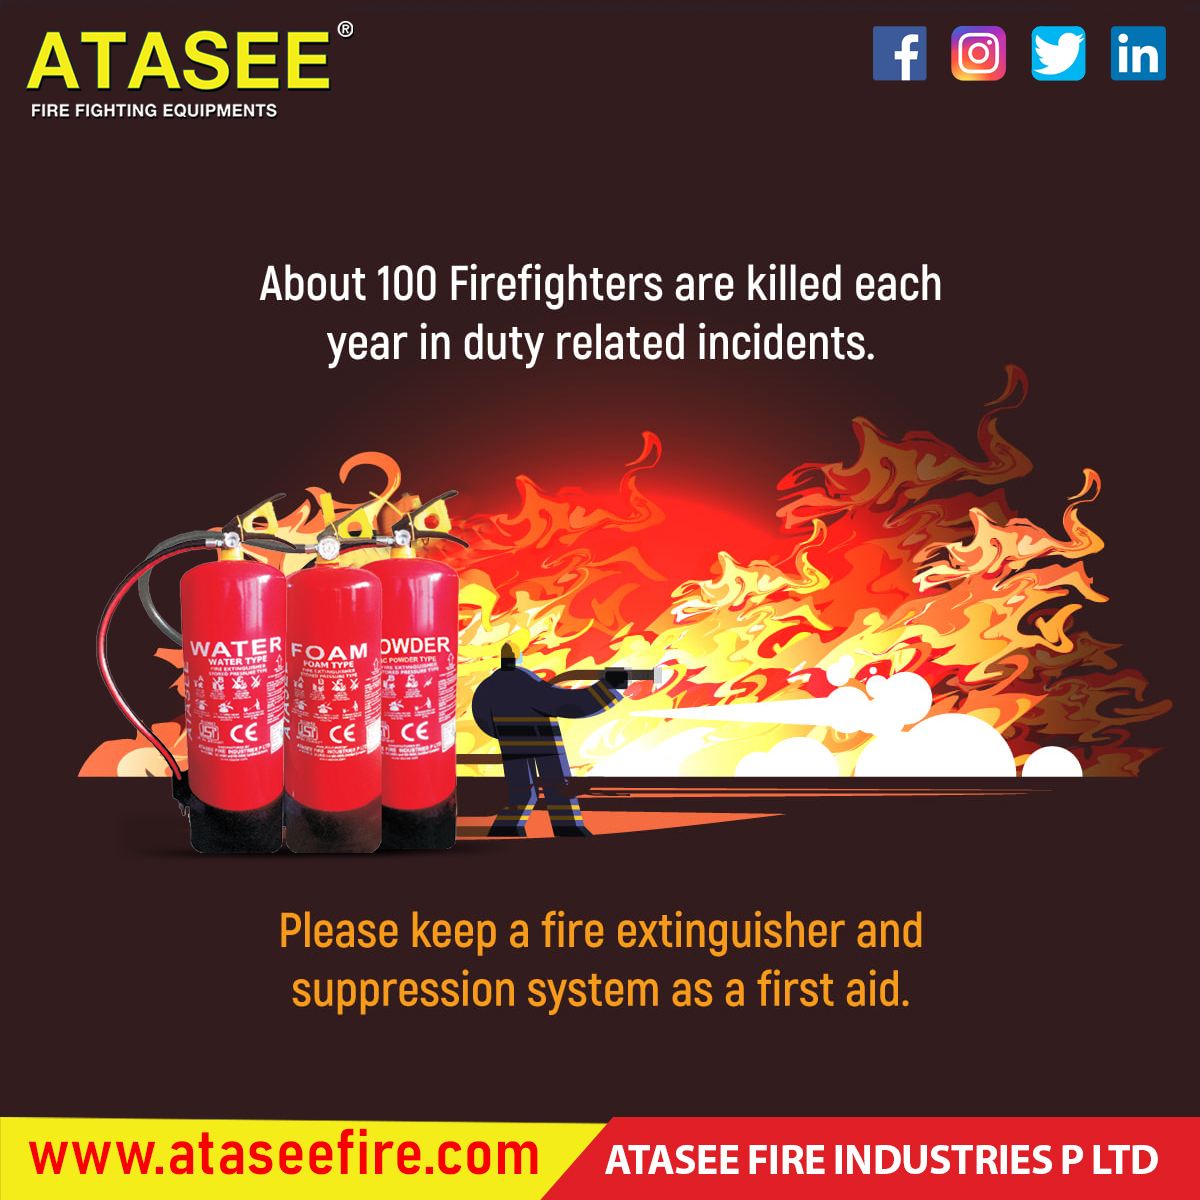 About 100 Firefighter are killed each year in duty related incidents. Please keep a fire extinguisher and suppression system as a first aid. 

 #firefighter #firefighters #firefighterjobs #firefighterlife #firefighterposts #firefightercombatchallenge #firefightertraining